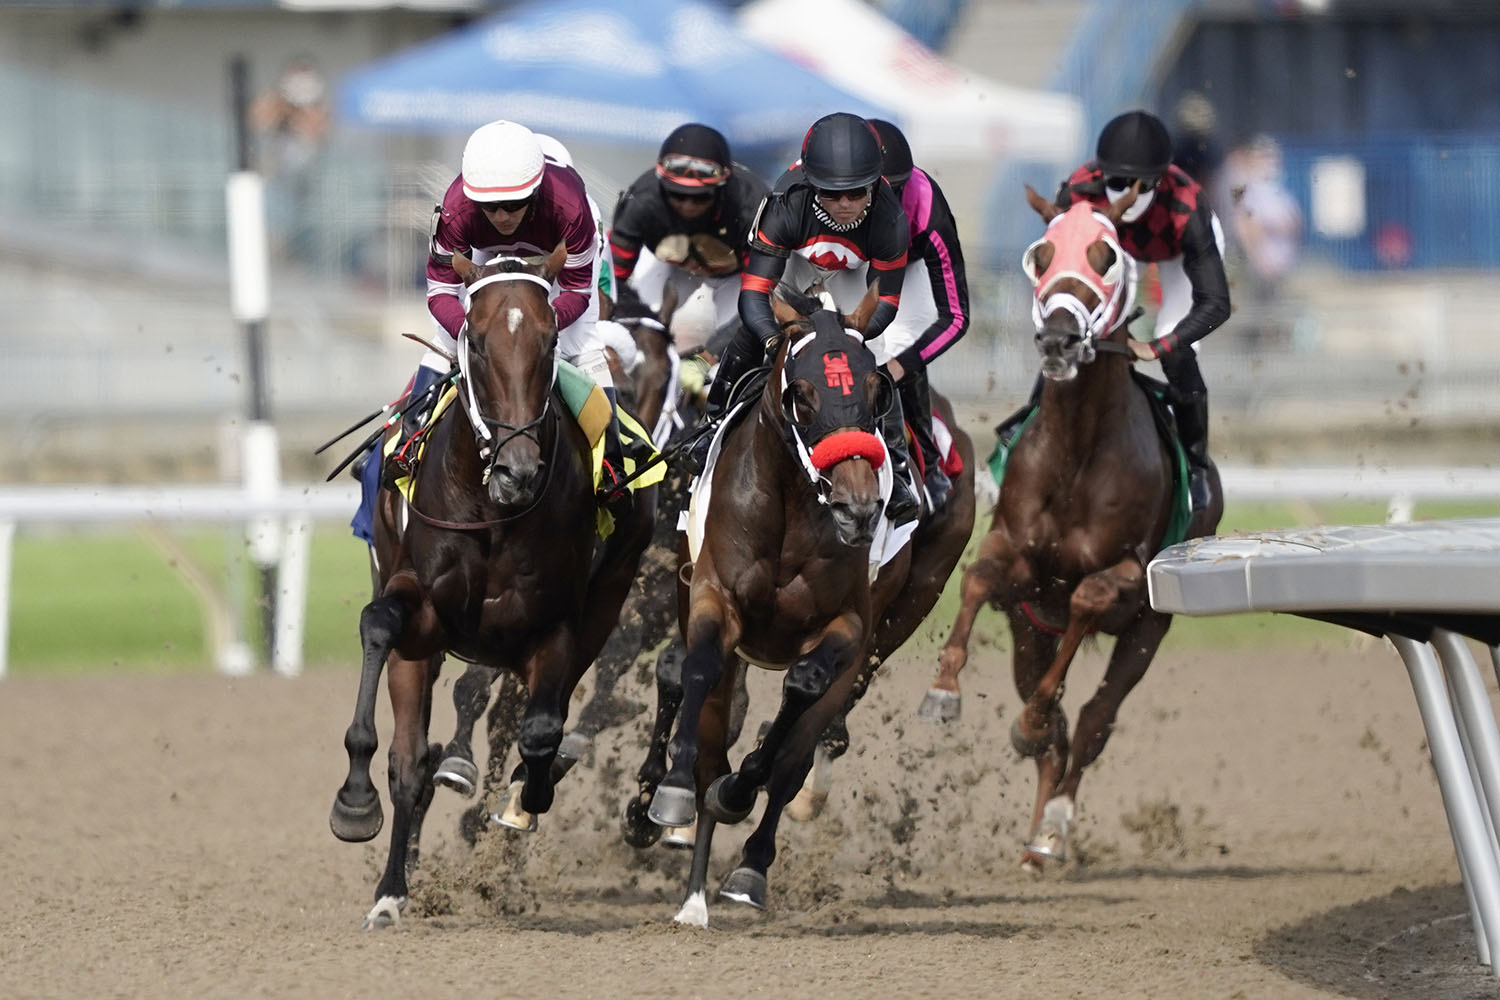 New post times for the remainder of the Woodbine Thoroughbred meet